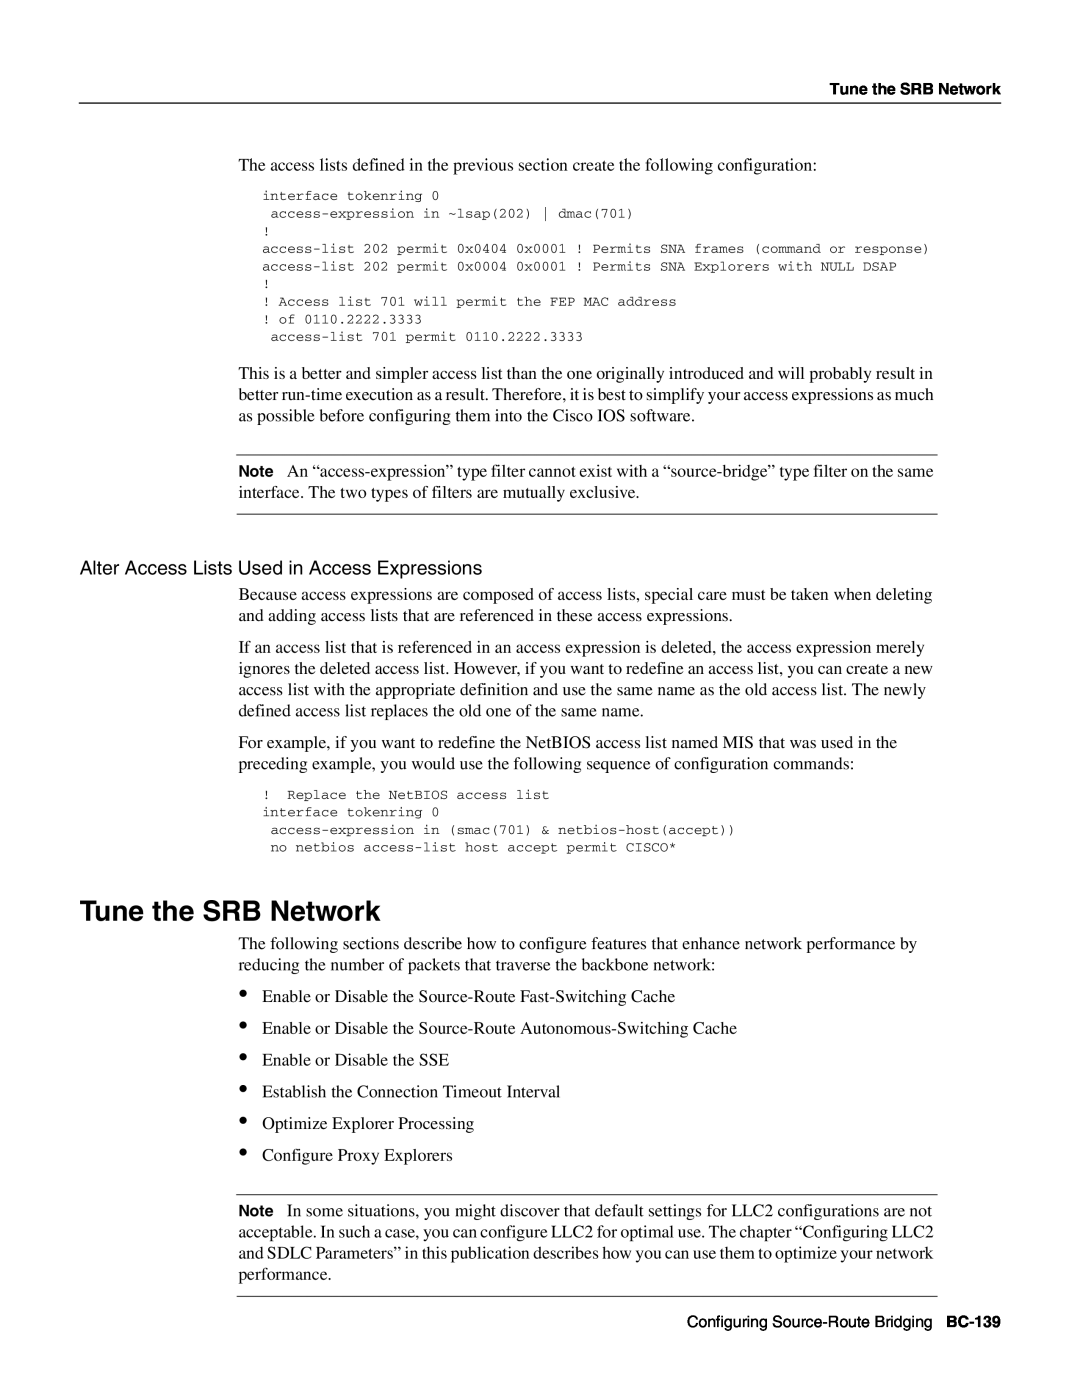 Cisco Systems BC-109 manual Tune the SRB Network, Alter Access Lists Used in Access Expressions 